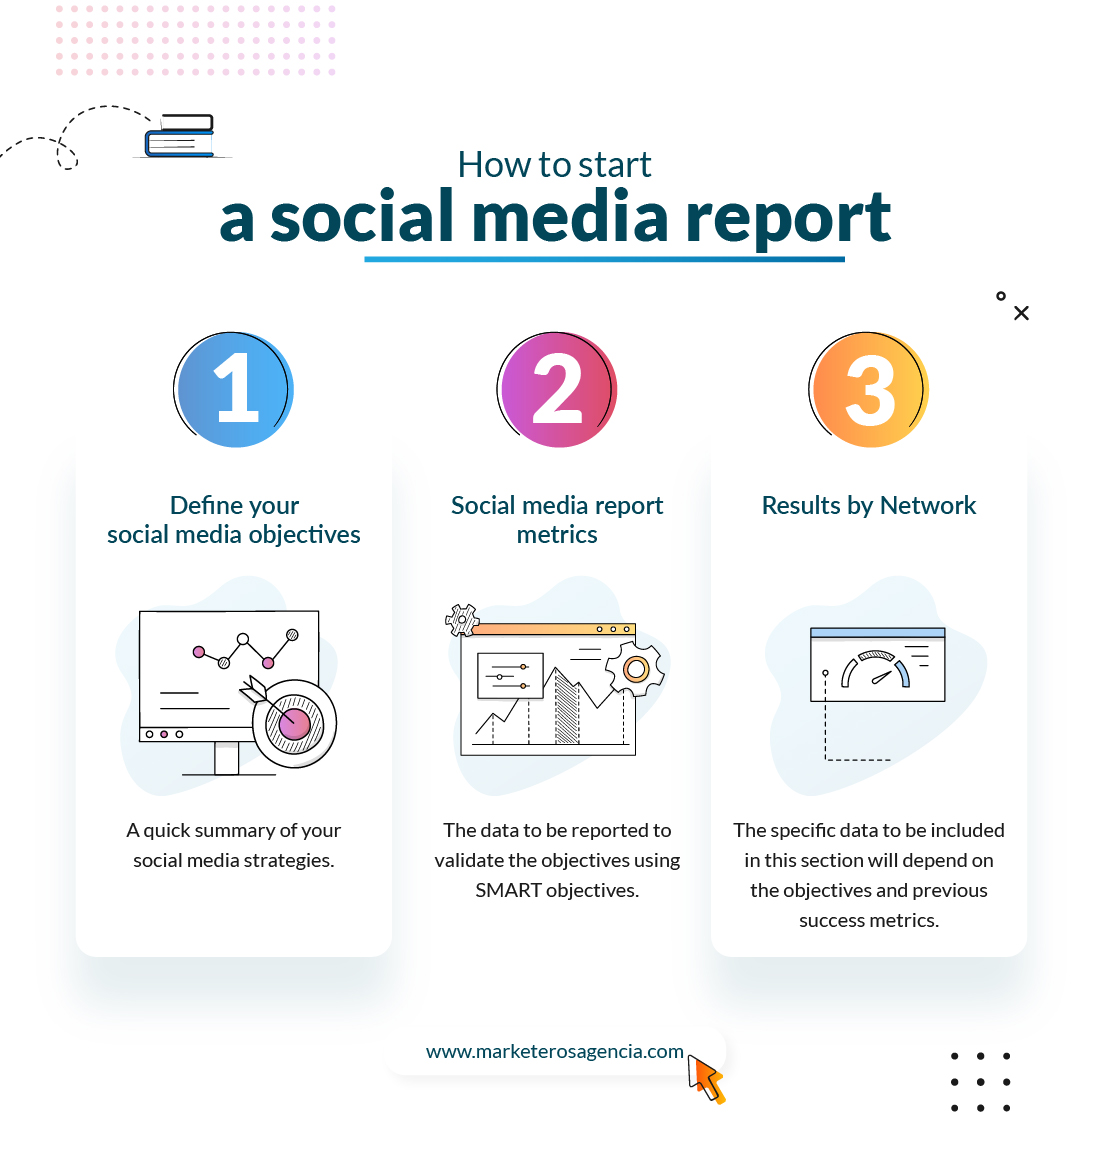 How to start a social media report